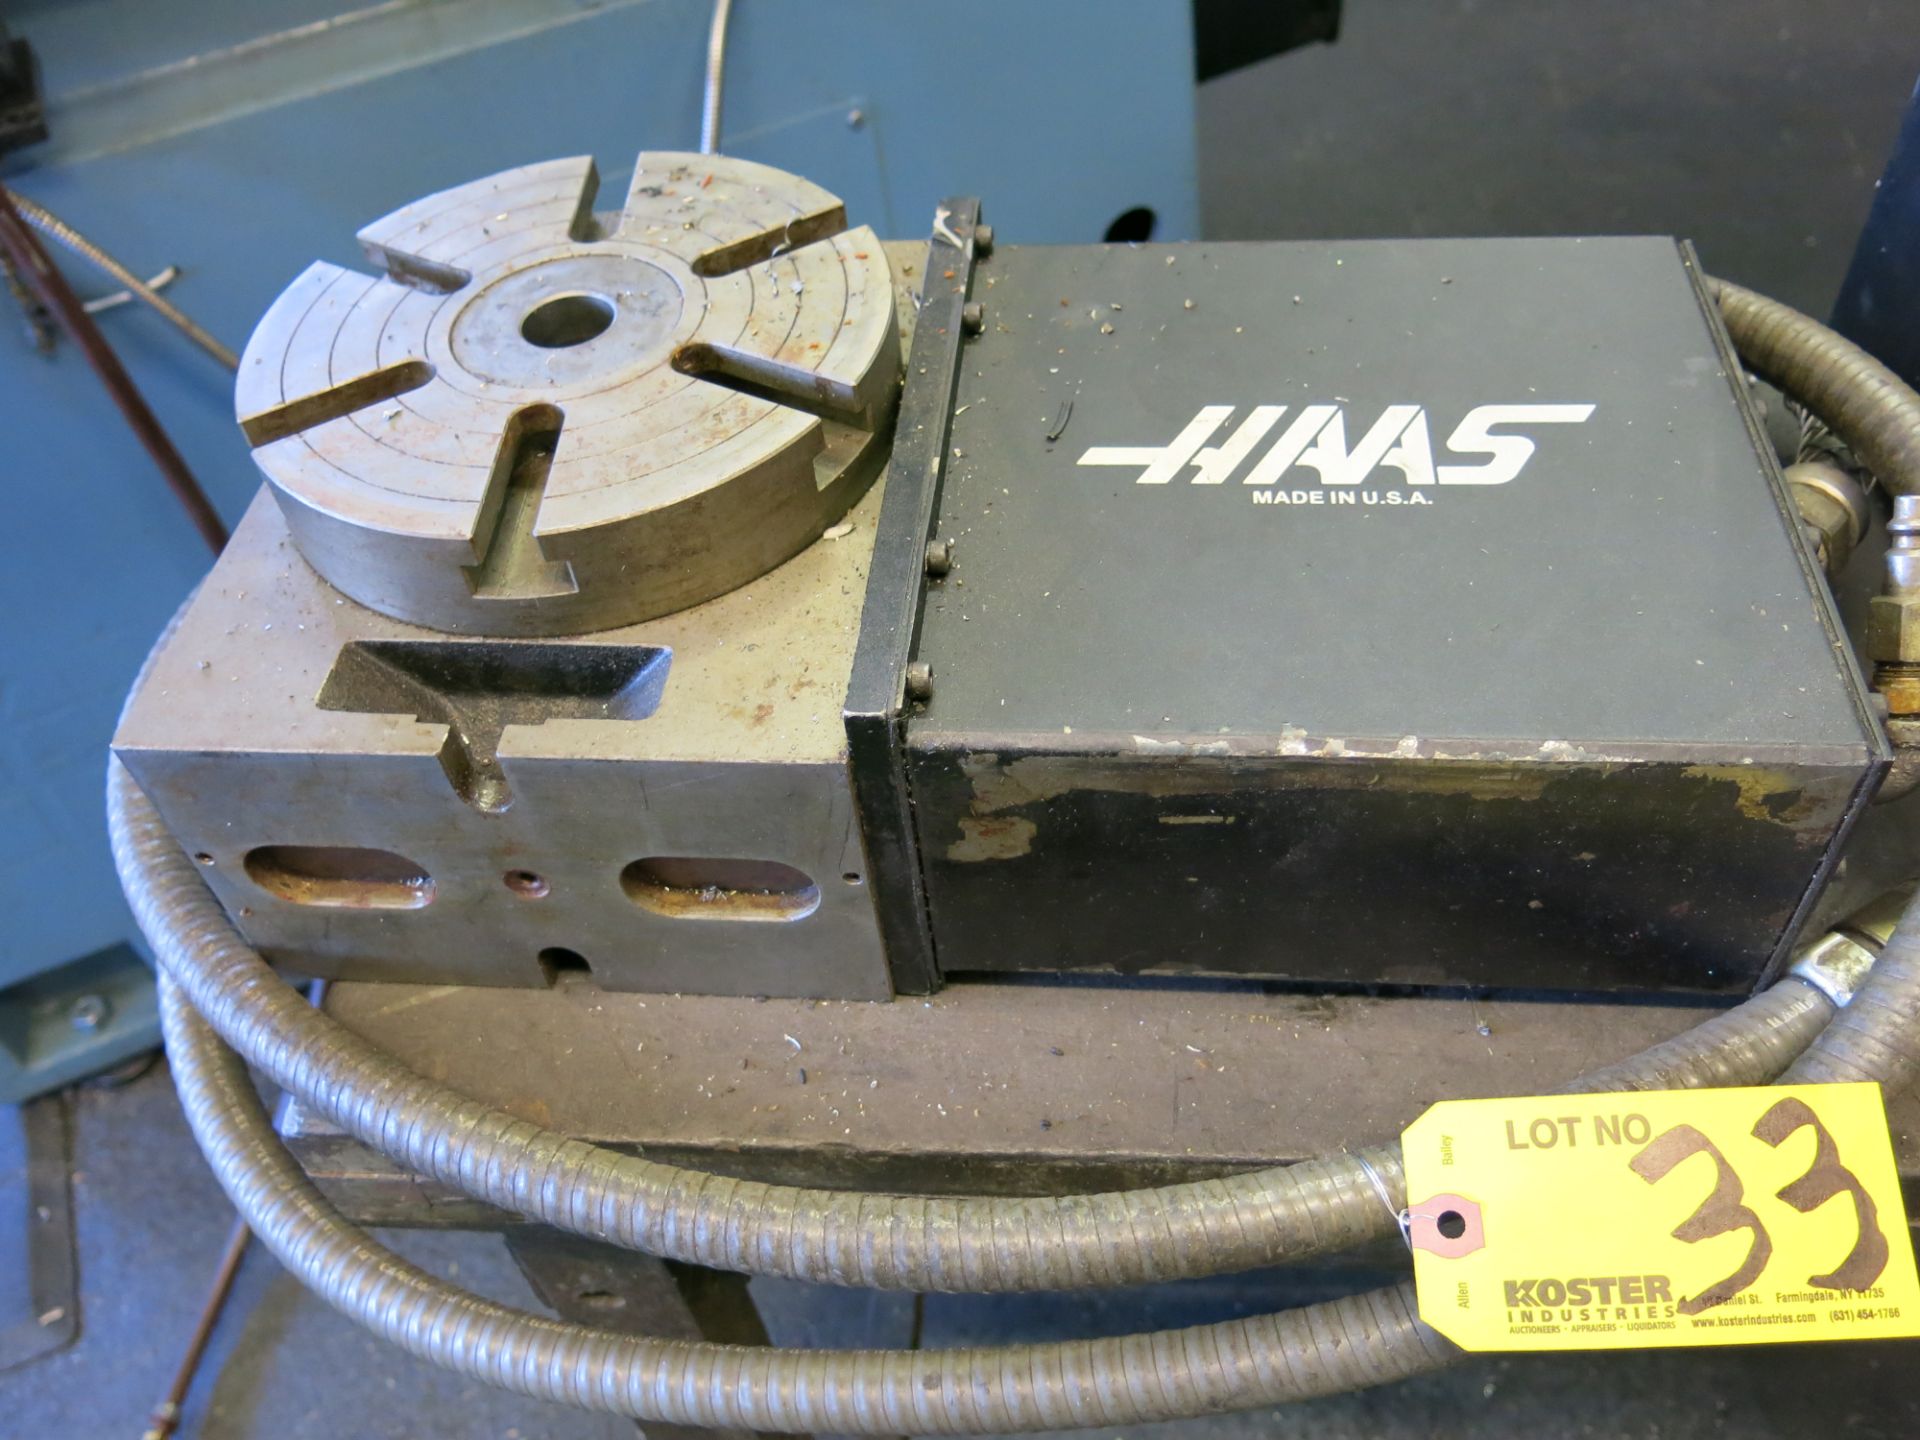 (1) HAAS 7" HRT-7 4TH AXIS ROTARY TABLE WITH HAAS SERVO CONTROLS - Image 2 of 3